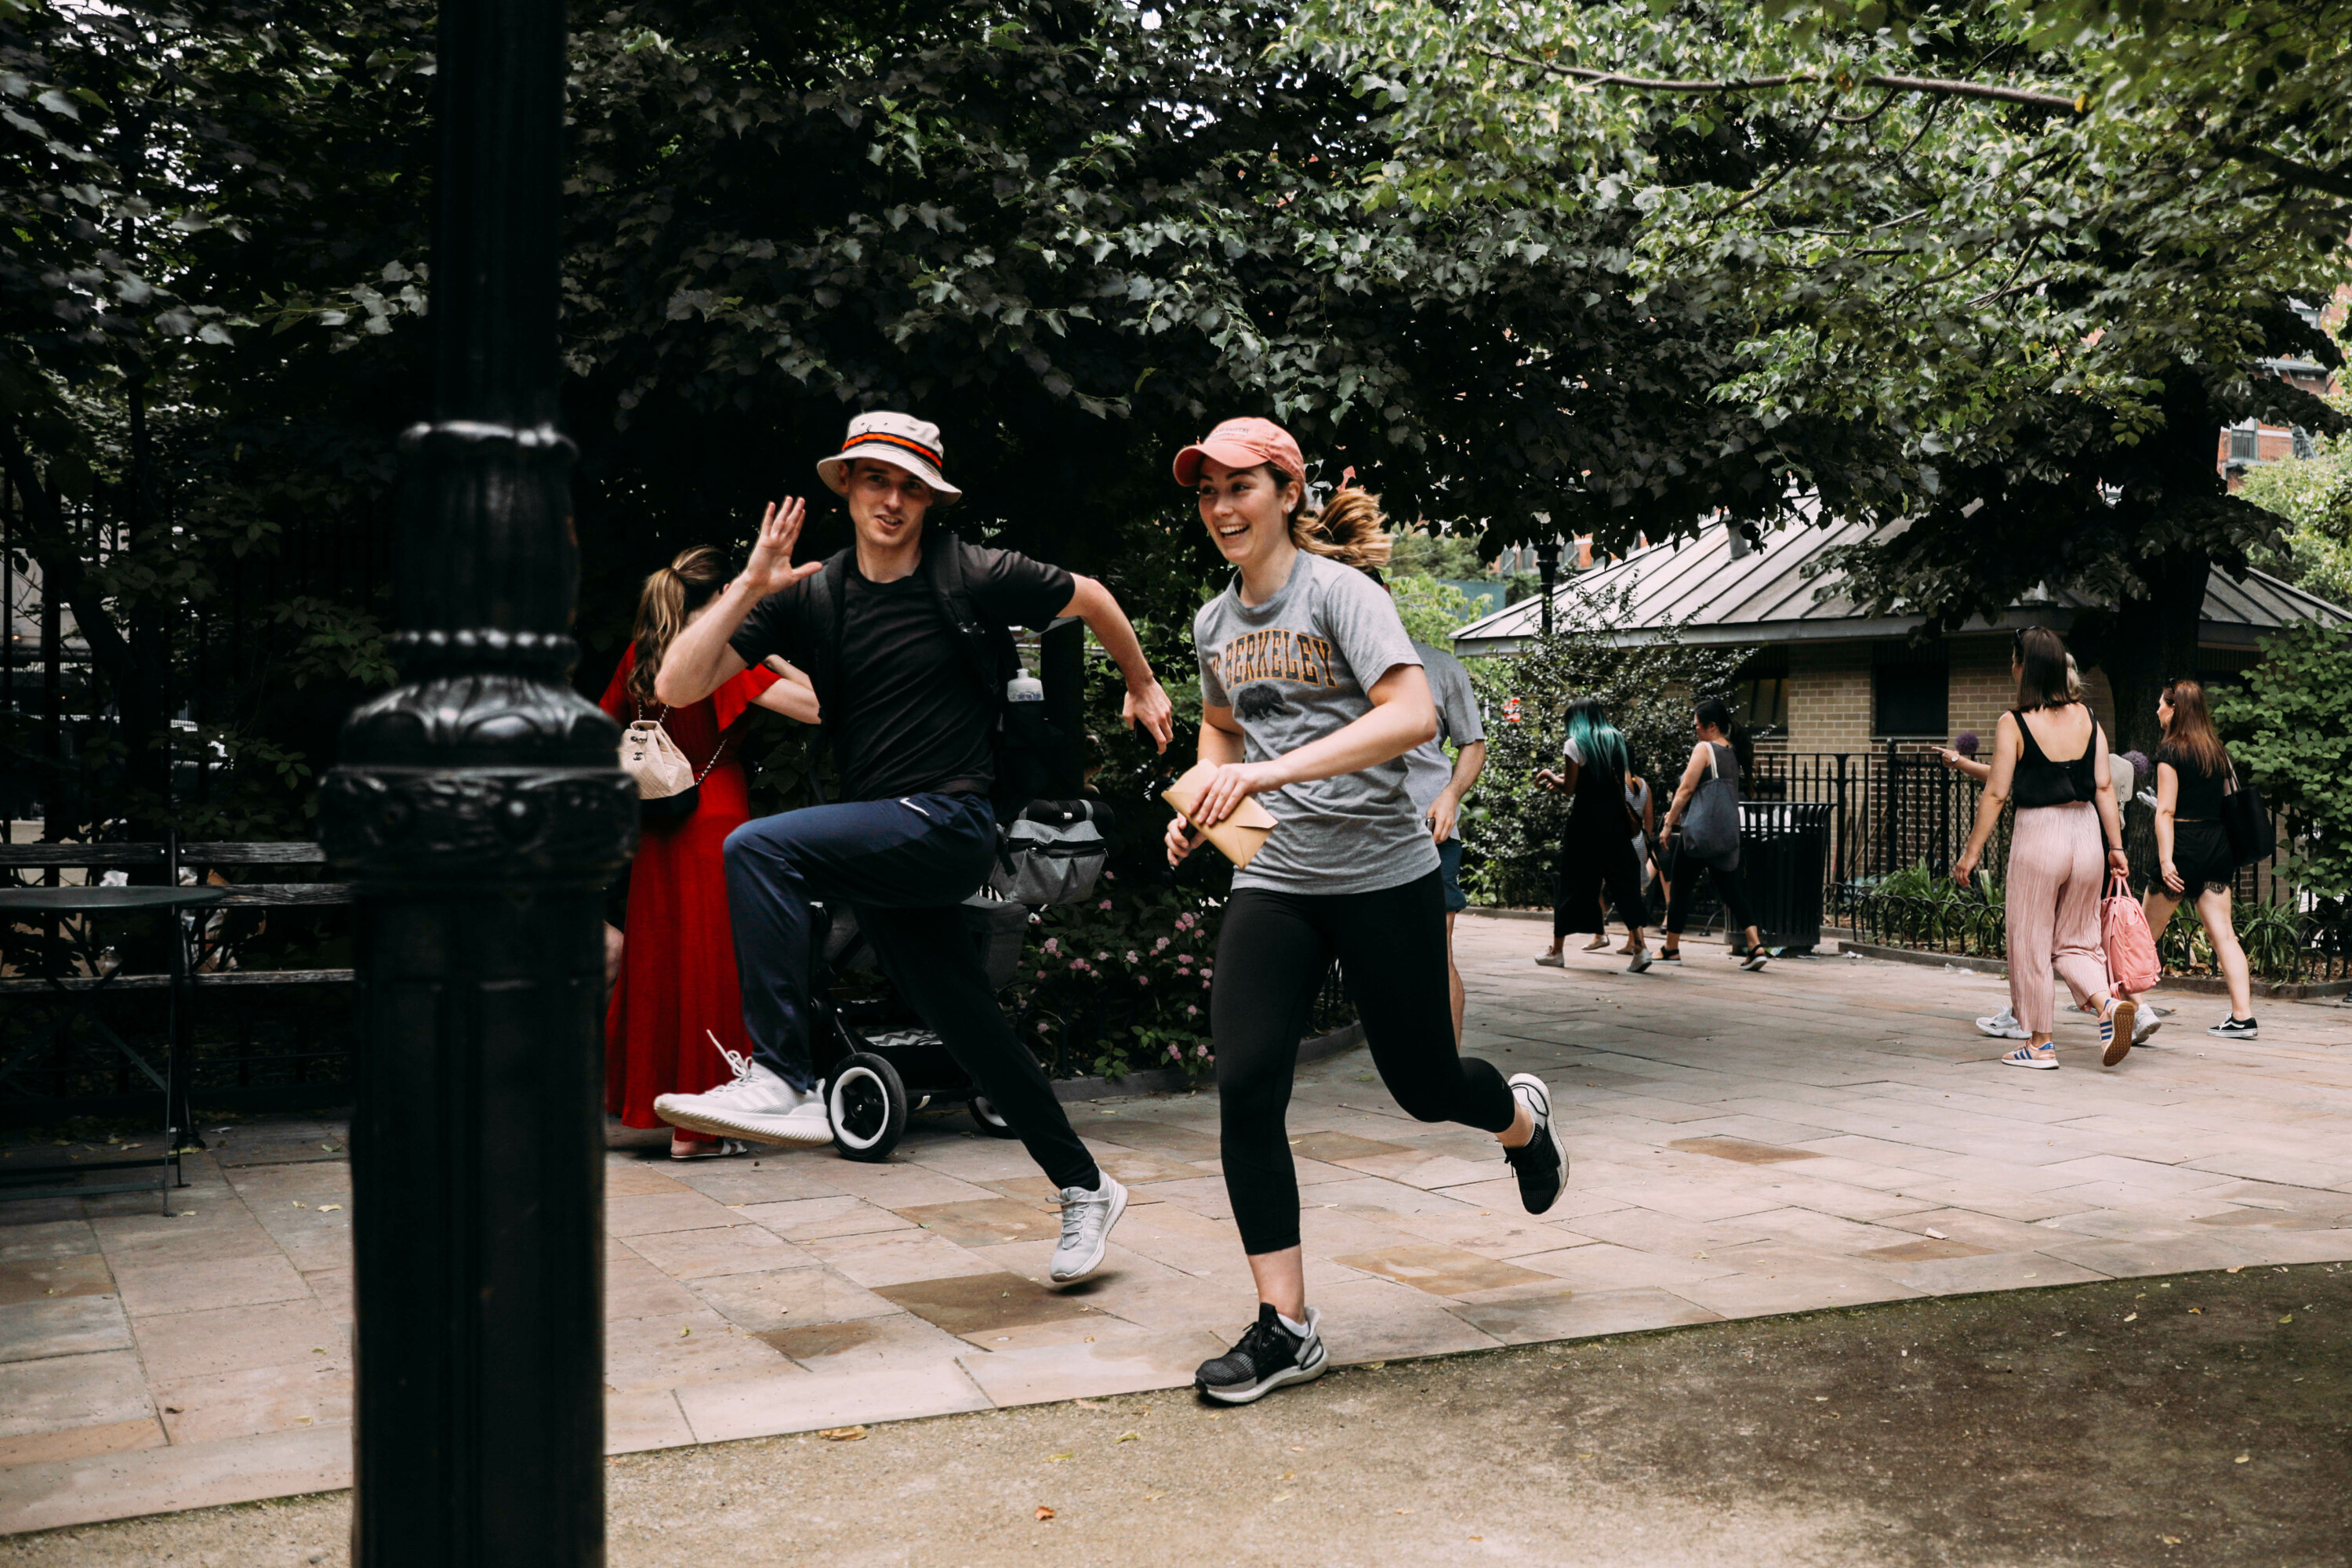 Sprint across Central Park to solve an immersive puzzle this summer